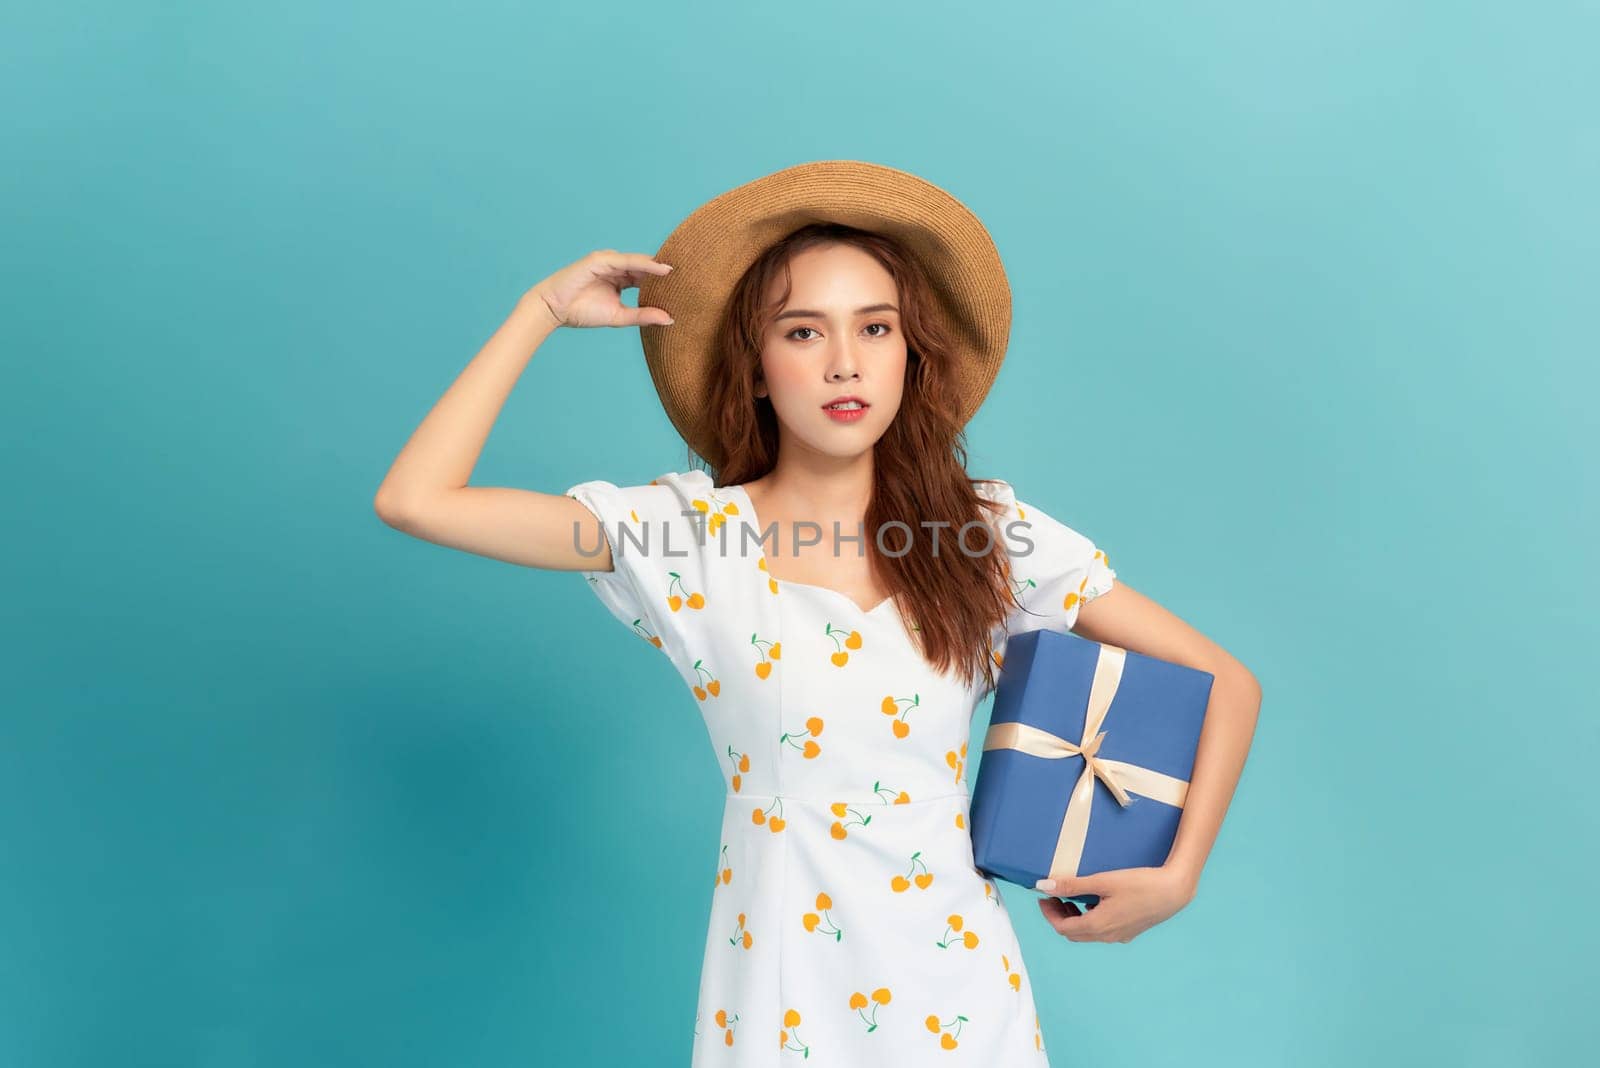 Portrait of a smiling young woman in summer dress holding gift box isolated over blue background by makidotvn